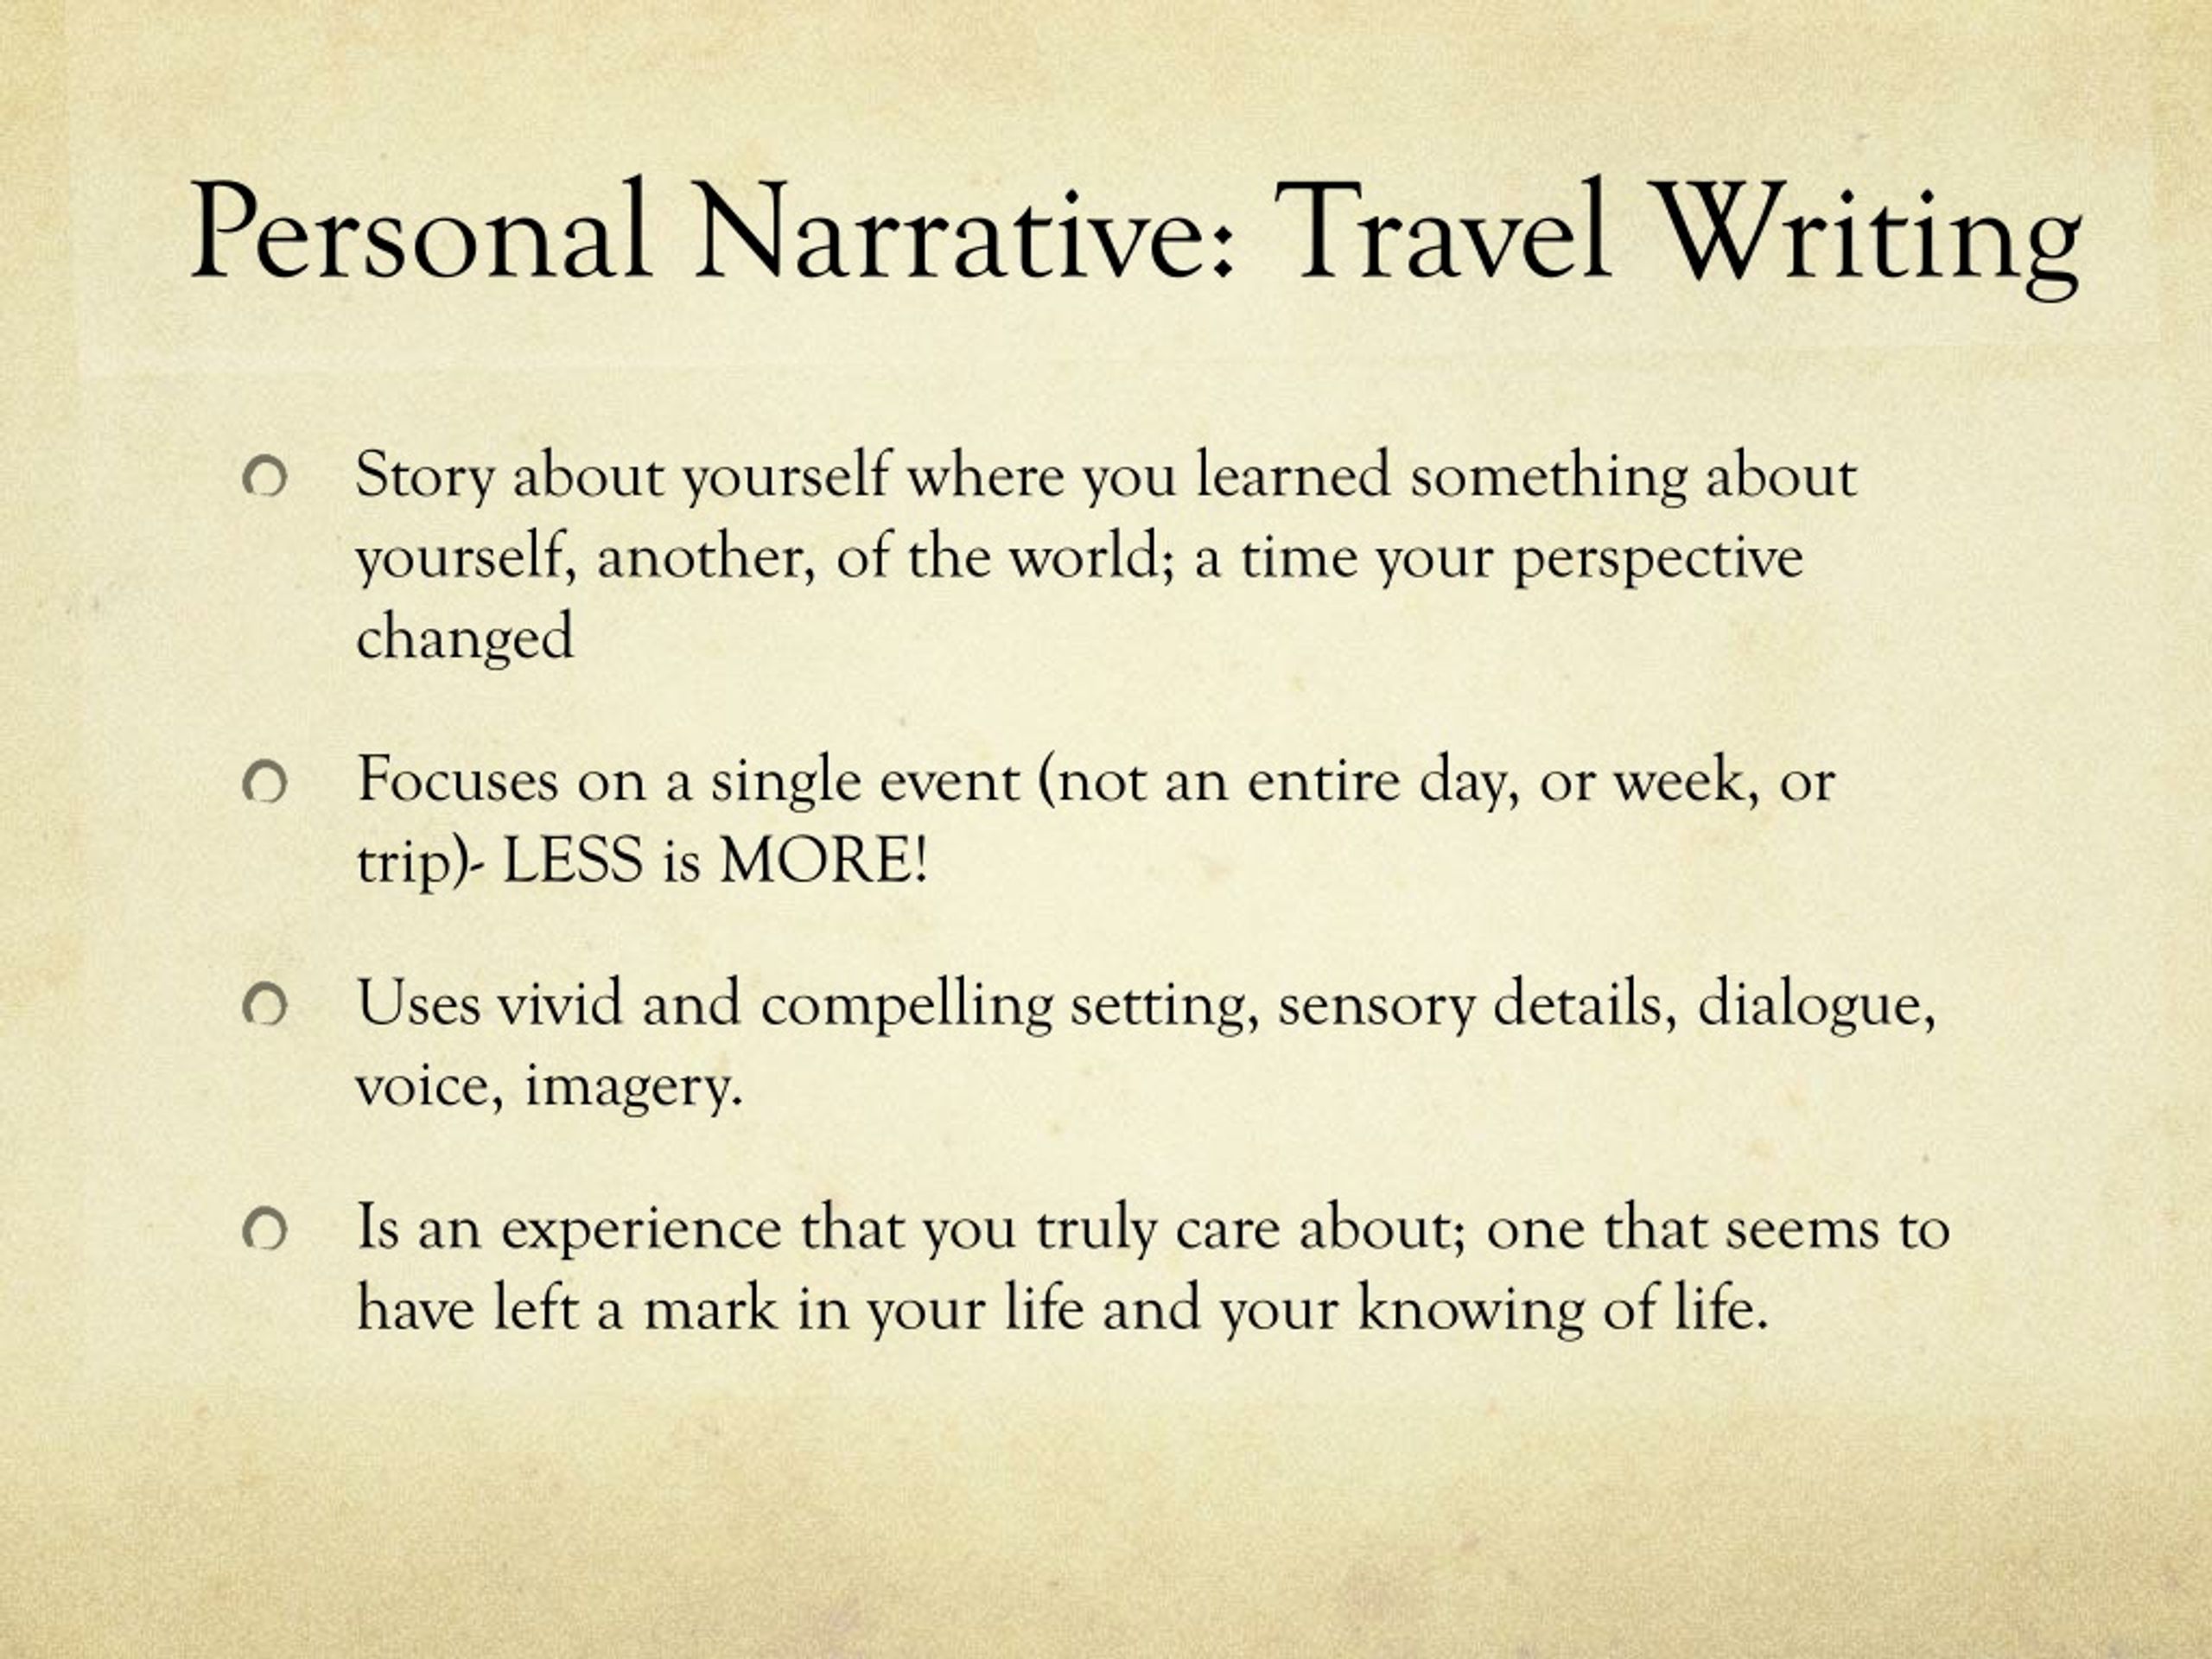 narrative travel writing examples